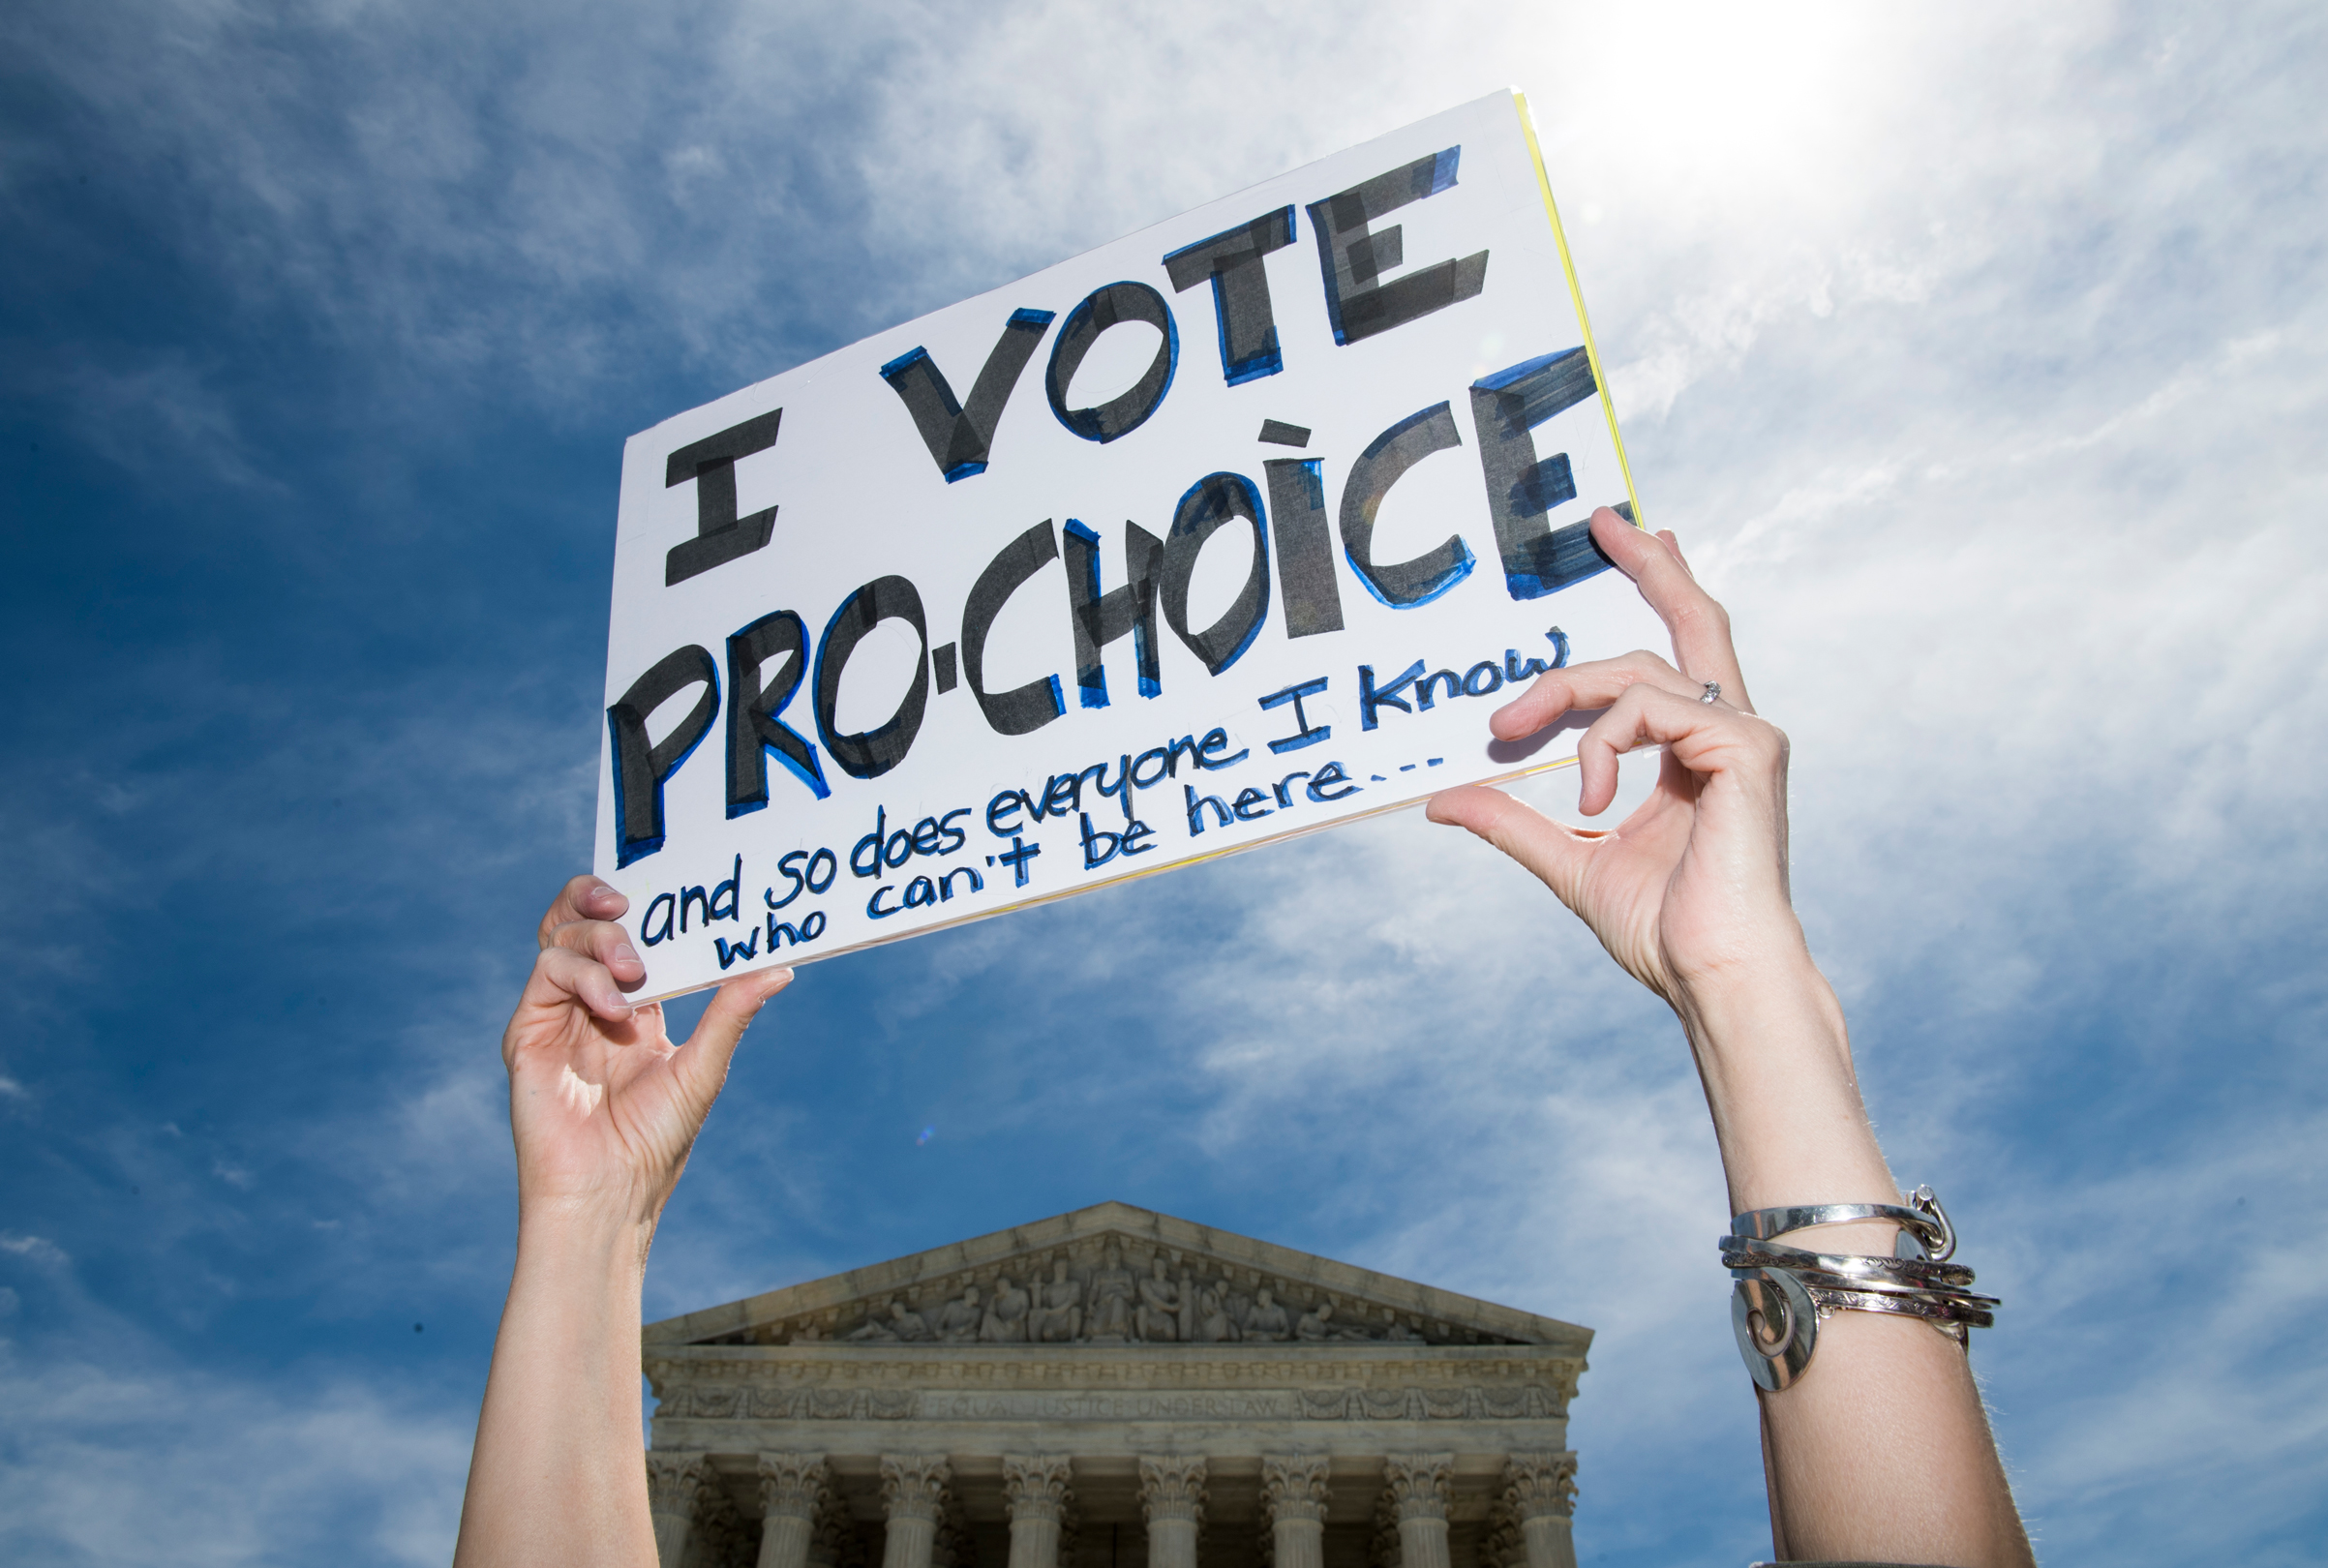 Abortion-rights activists rally at Supreme Court in Washington to protest new state bans on abortion services on May 21, 2019 (Bill Clark—CQ Roll Call/Getty Images)